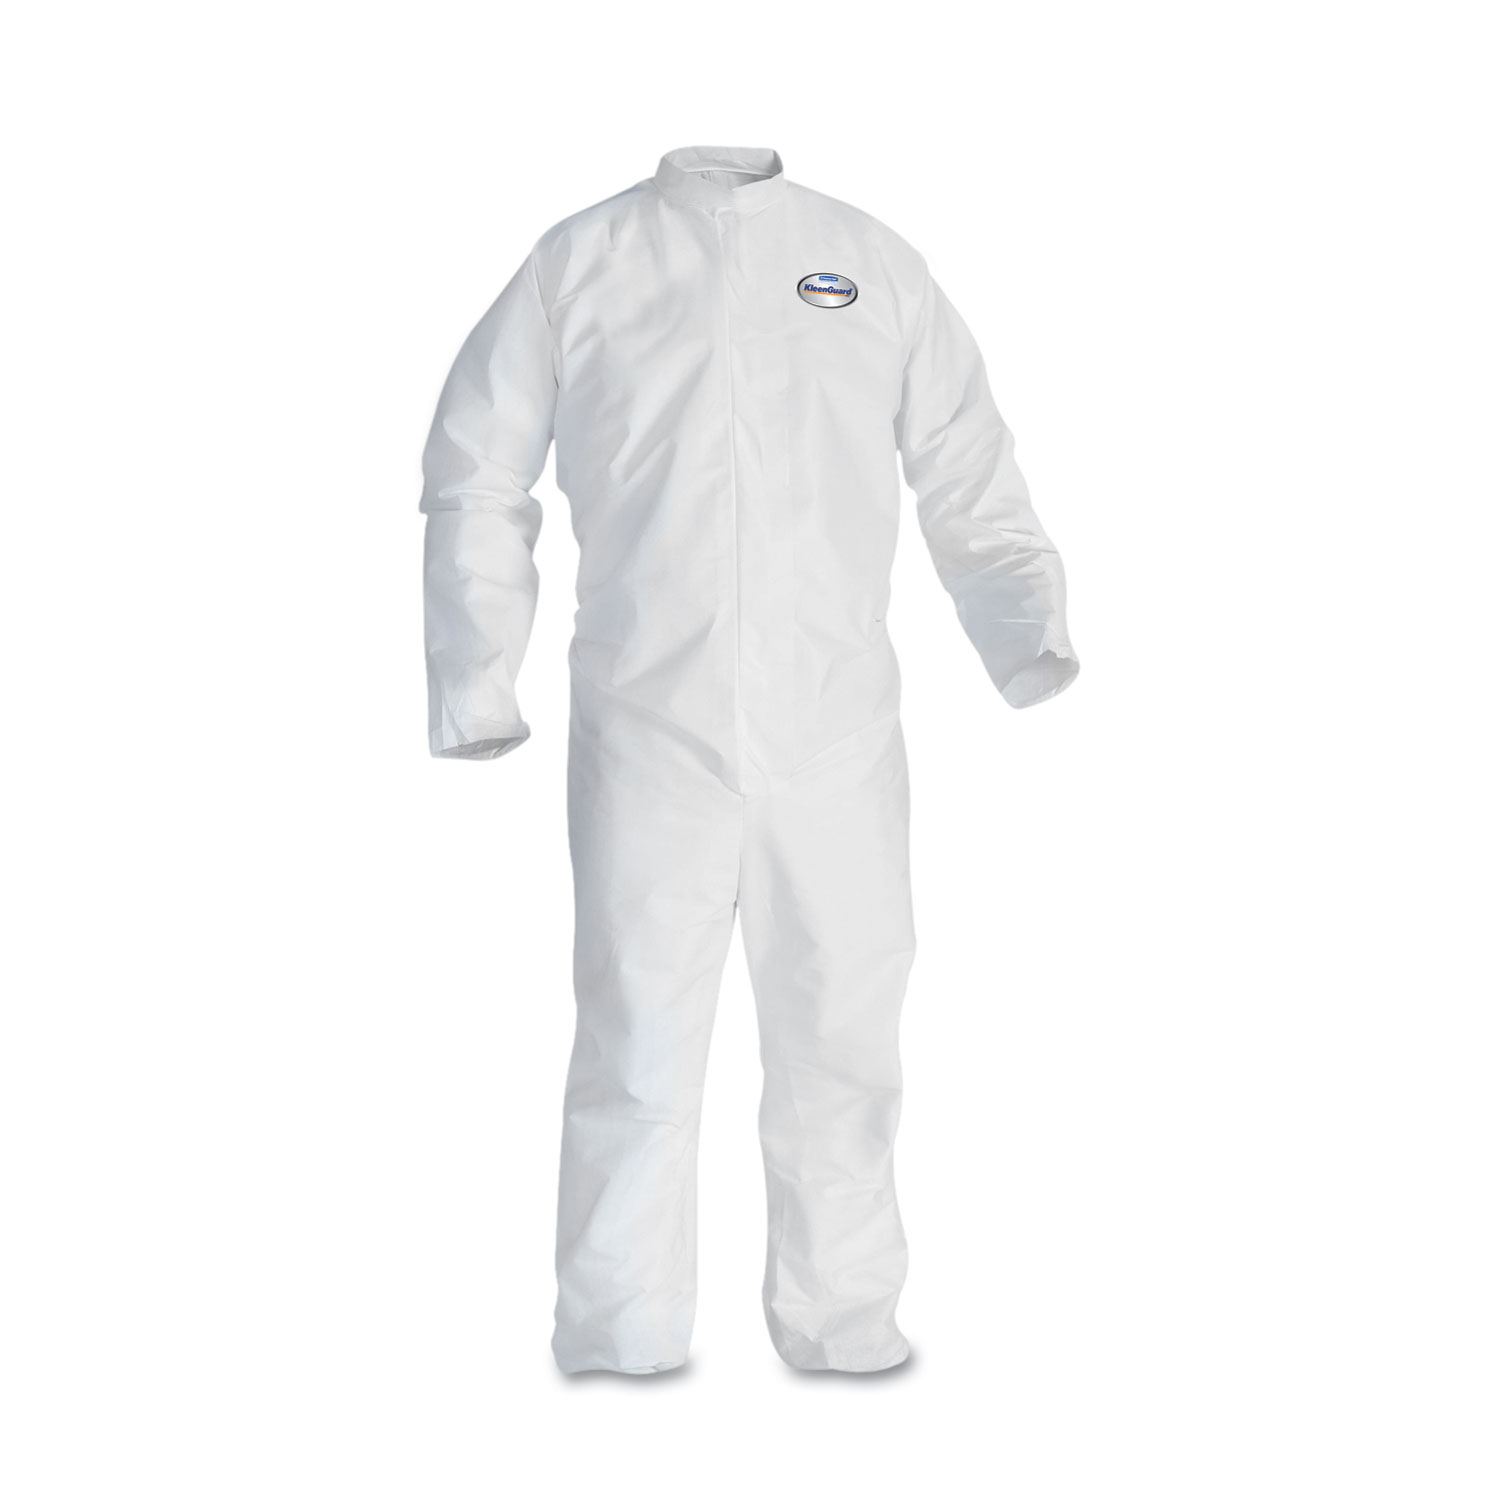 A30 Elastic-Back Coveralls, White, X-Large, 25/Case